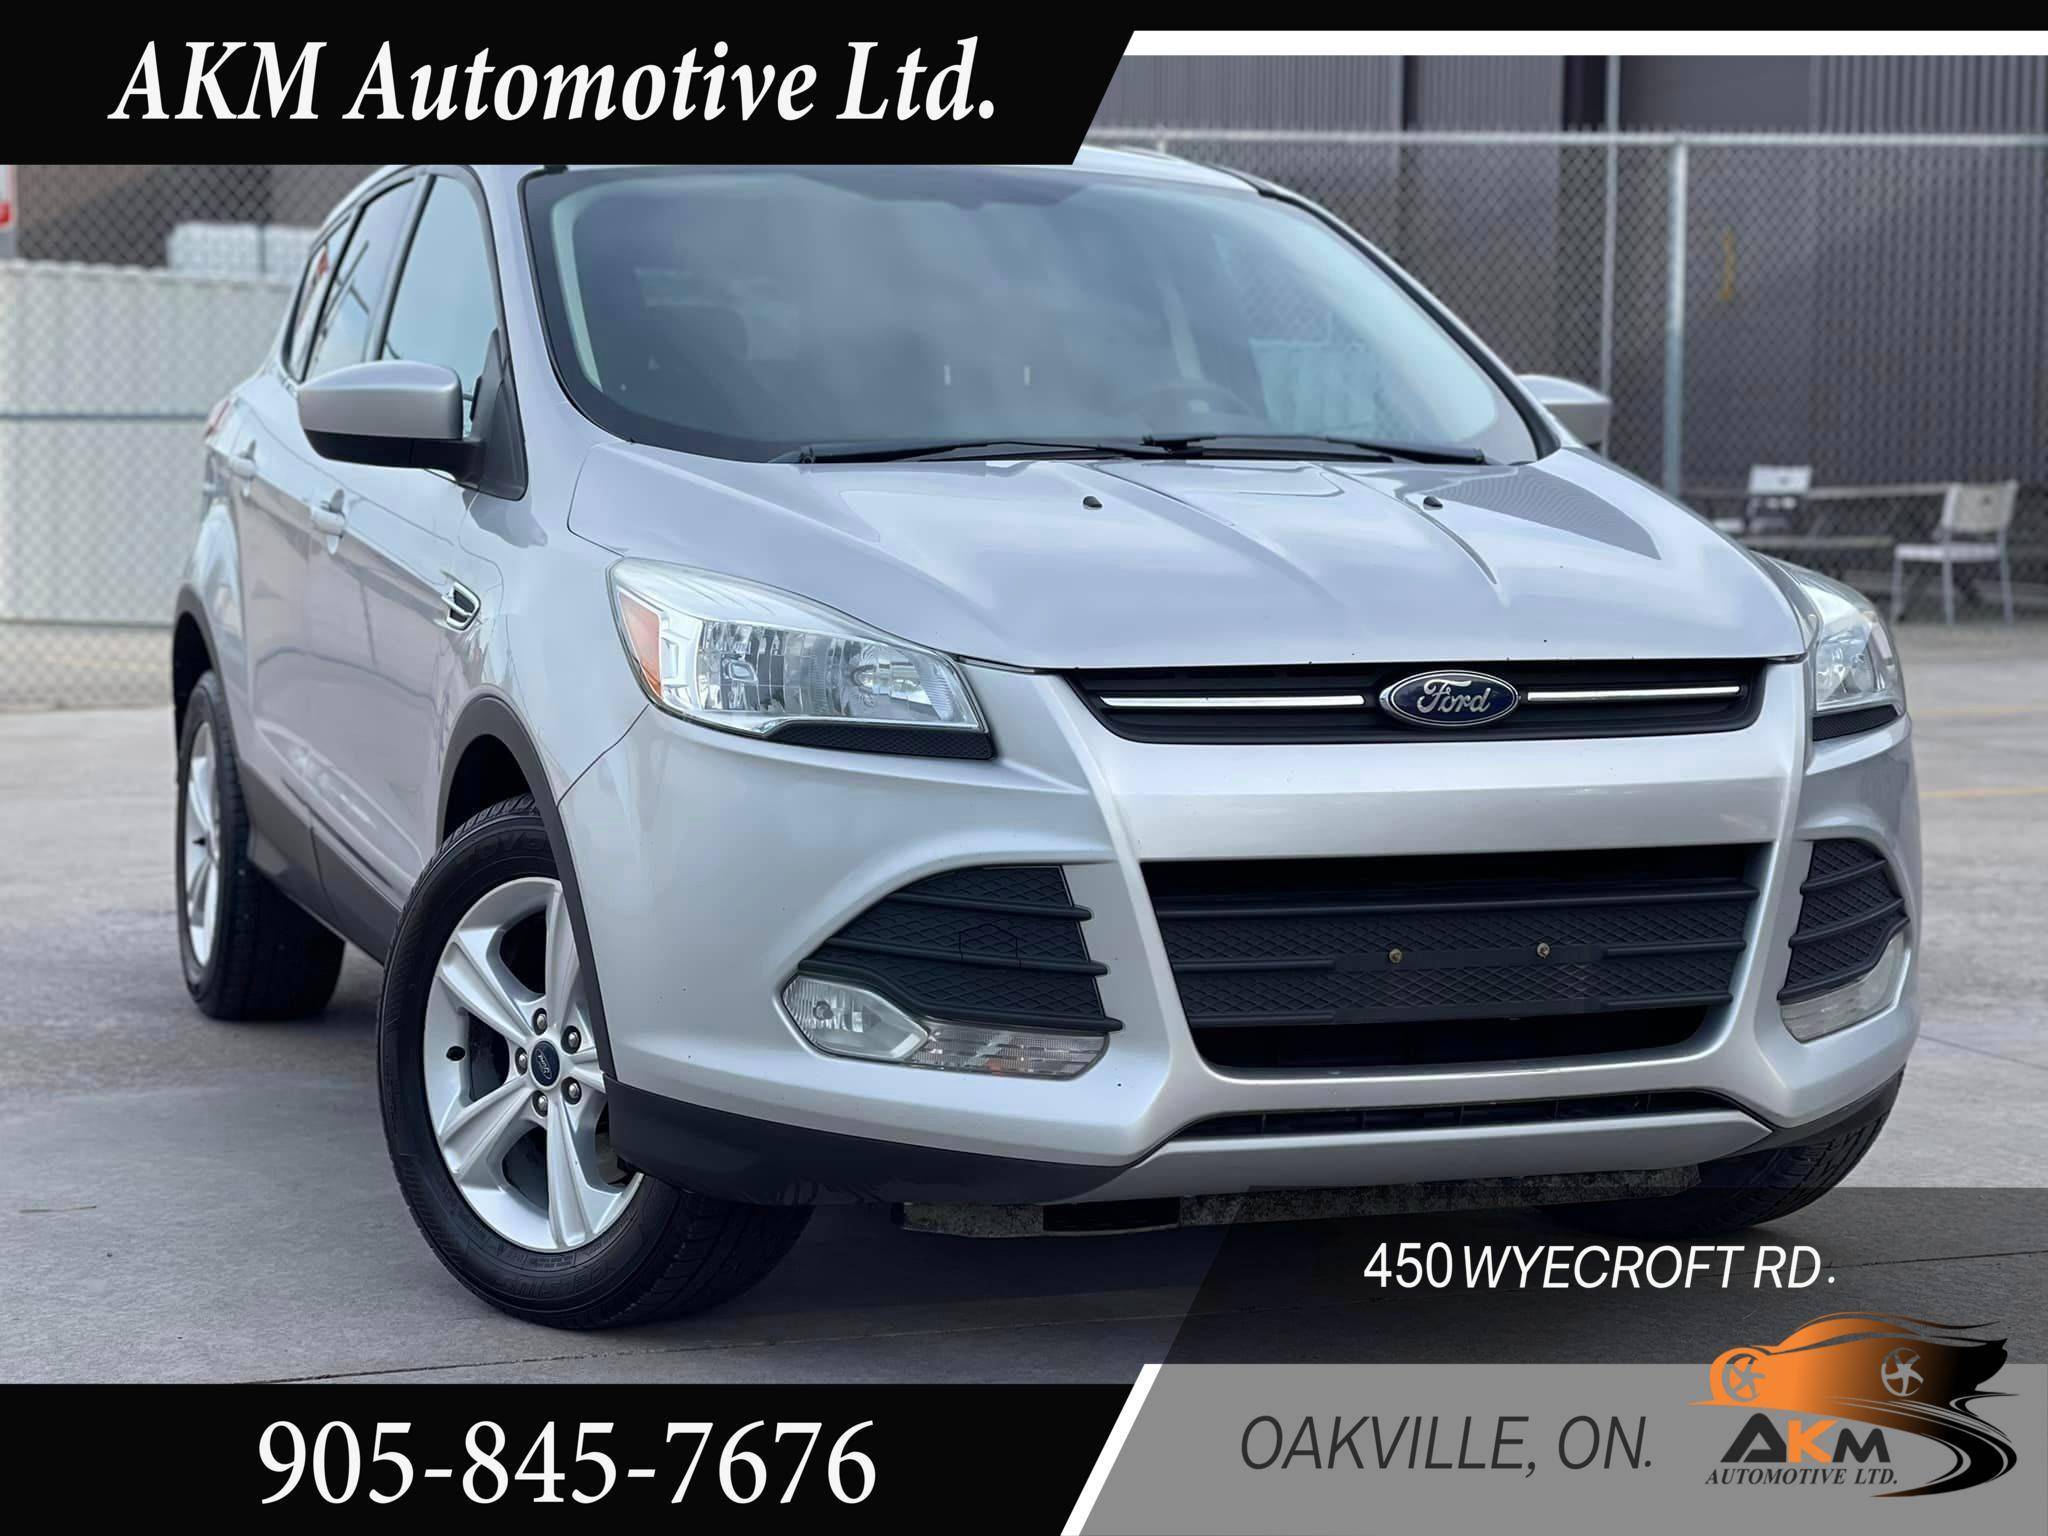 2015 Ford Escape 4WD 4dr SE, Accident Free, Certified